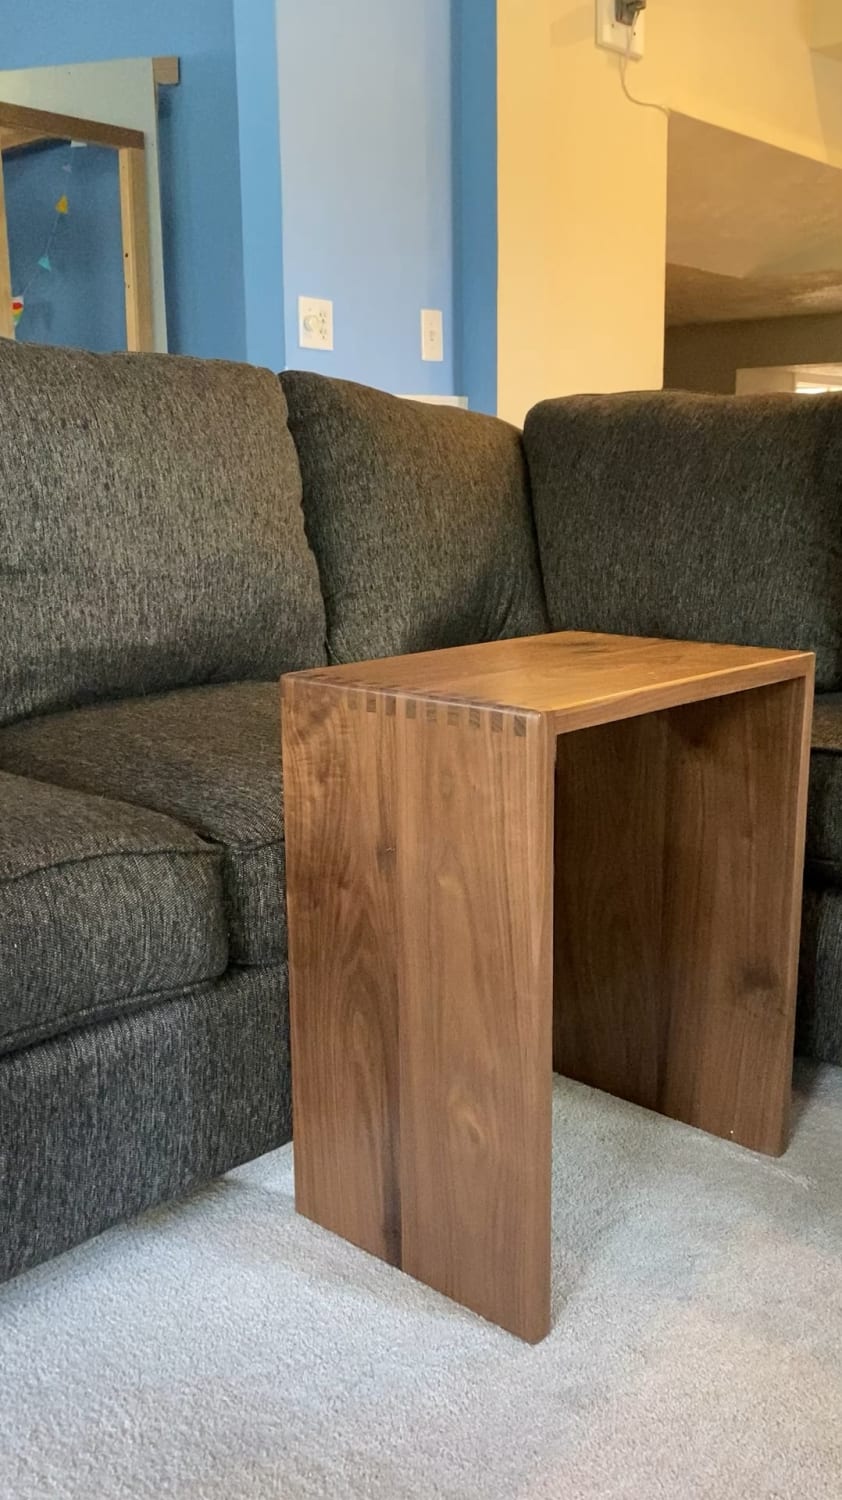 I made a little side table for my sectional.